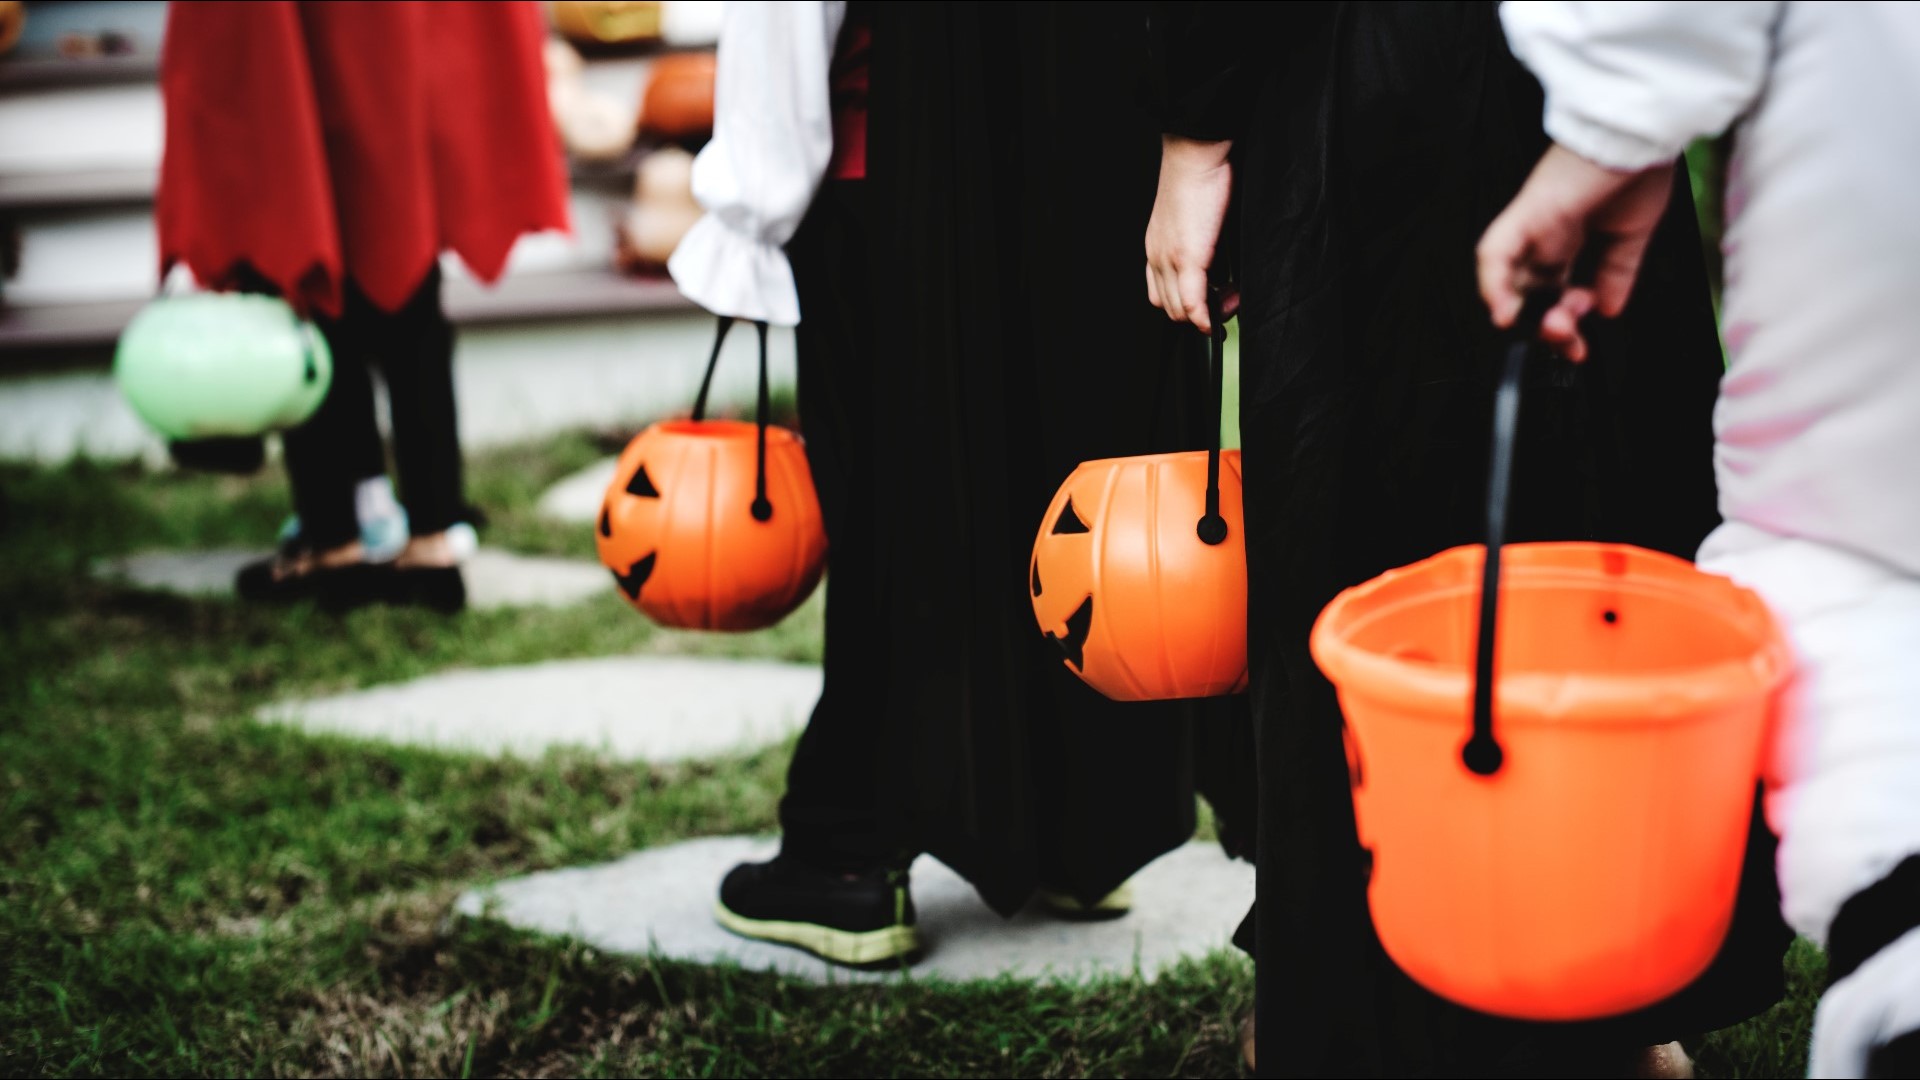 St. Louis is in for a bone-chilling Halloween this year. Here's how to keep your trick-or-treaters warm without ruining their costumes.